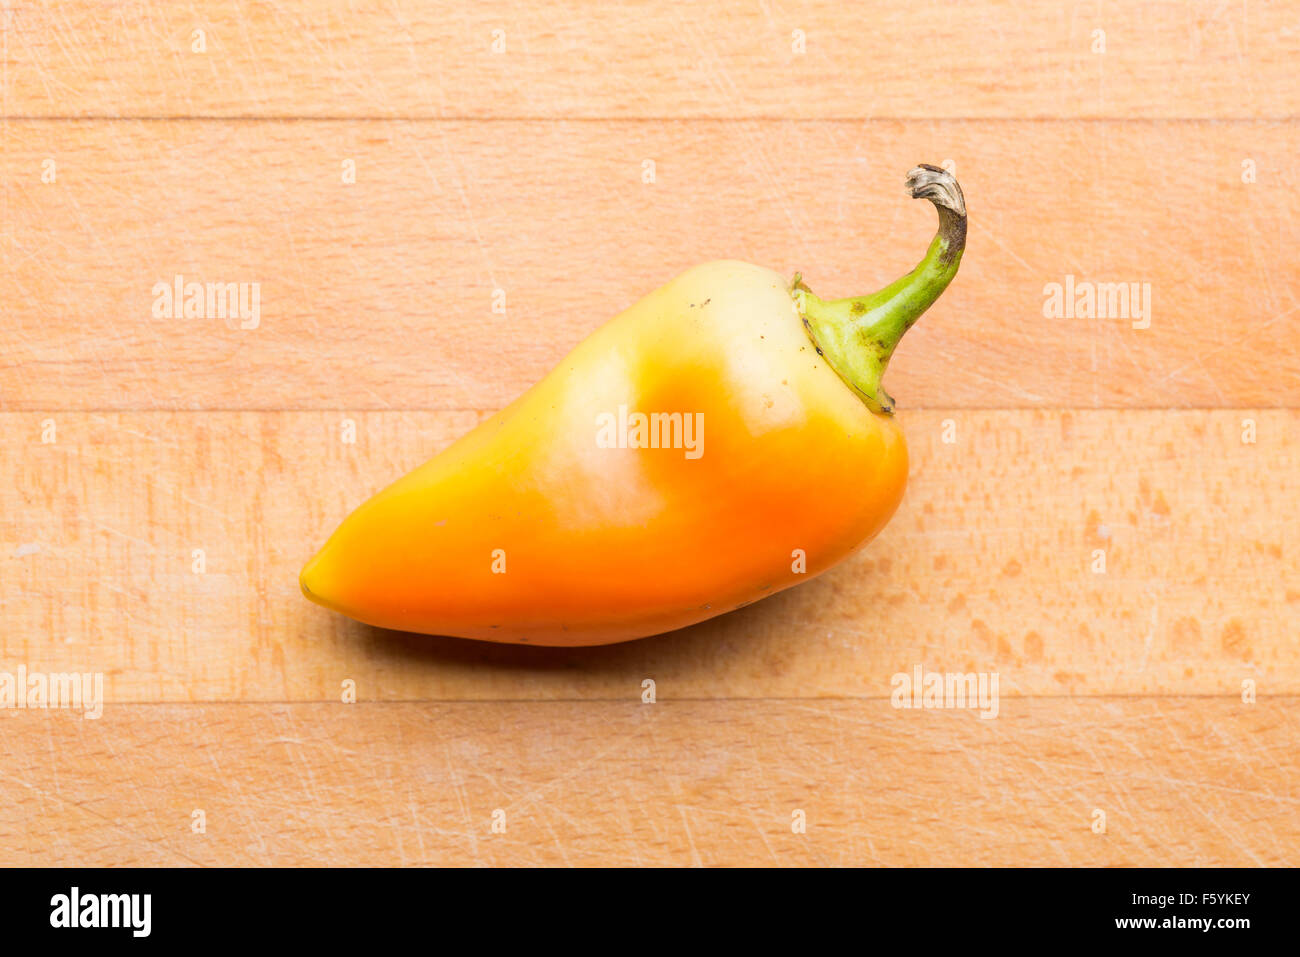 Natural yellow and orange bell pepper from the garden Stock Photo